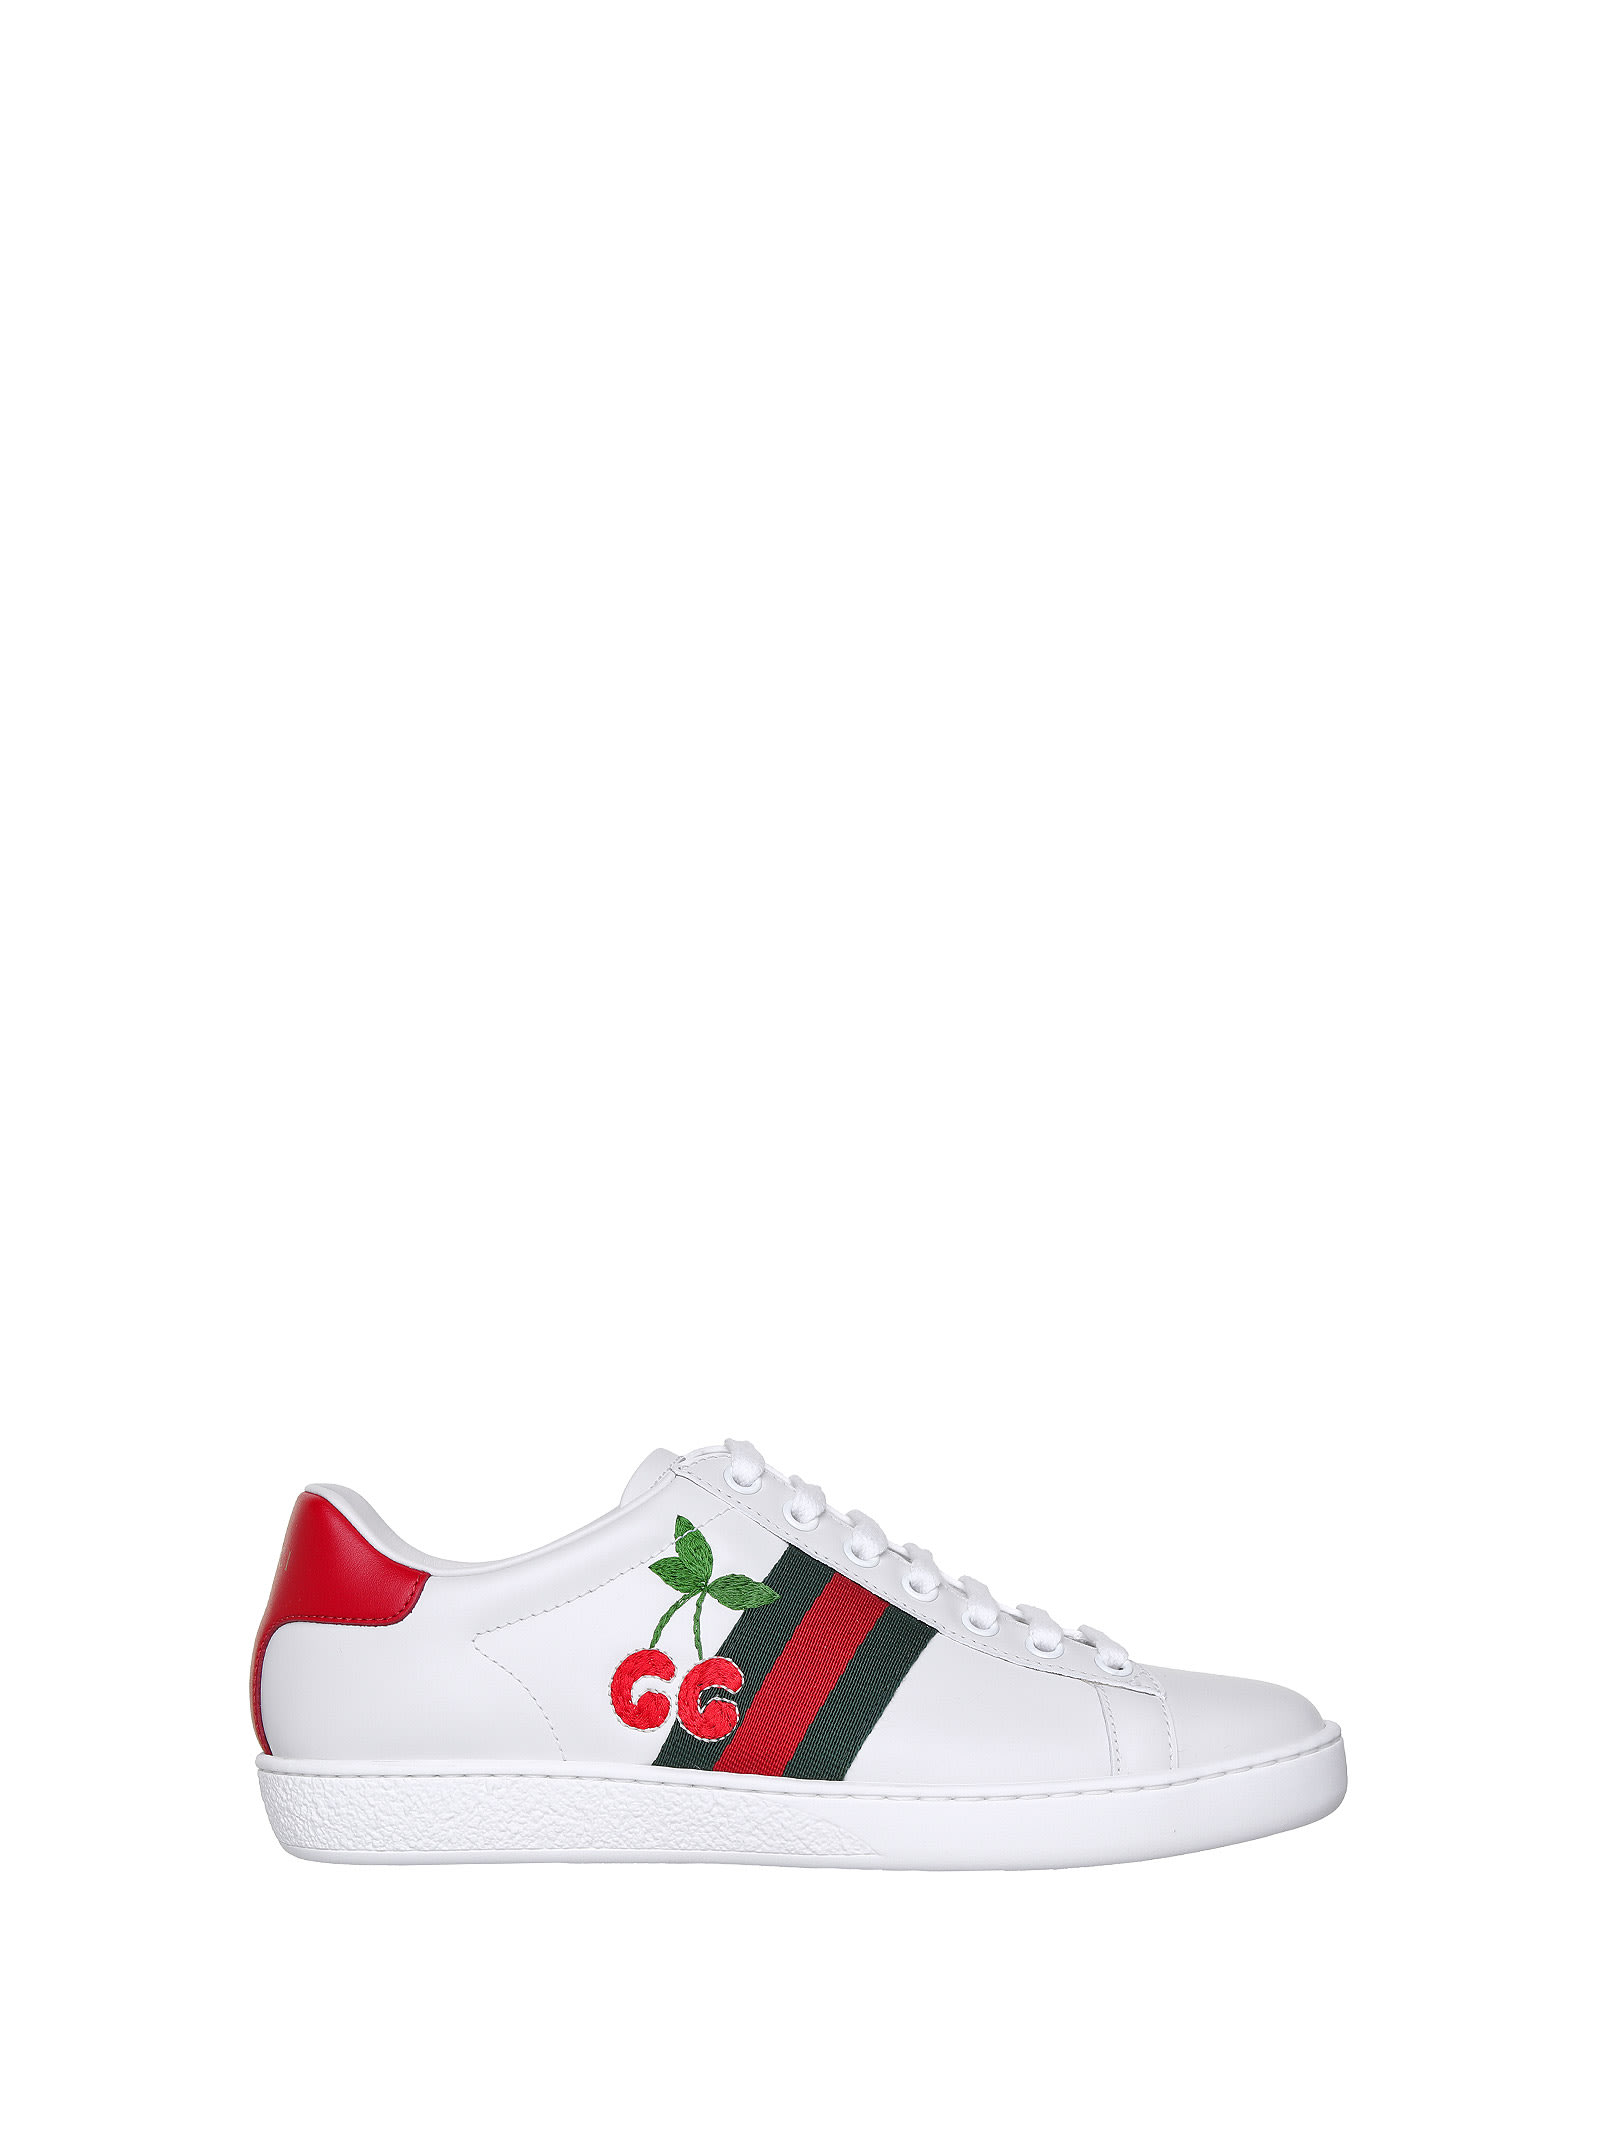 Buy Gucci Gucci Ace With Cherries online, shop Gucci shoes with free shipping